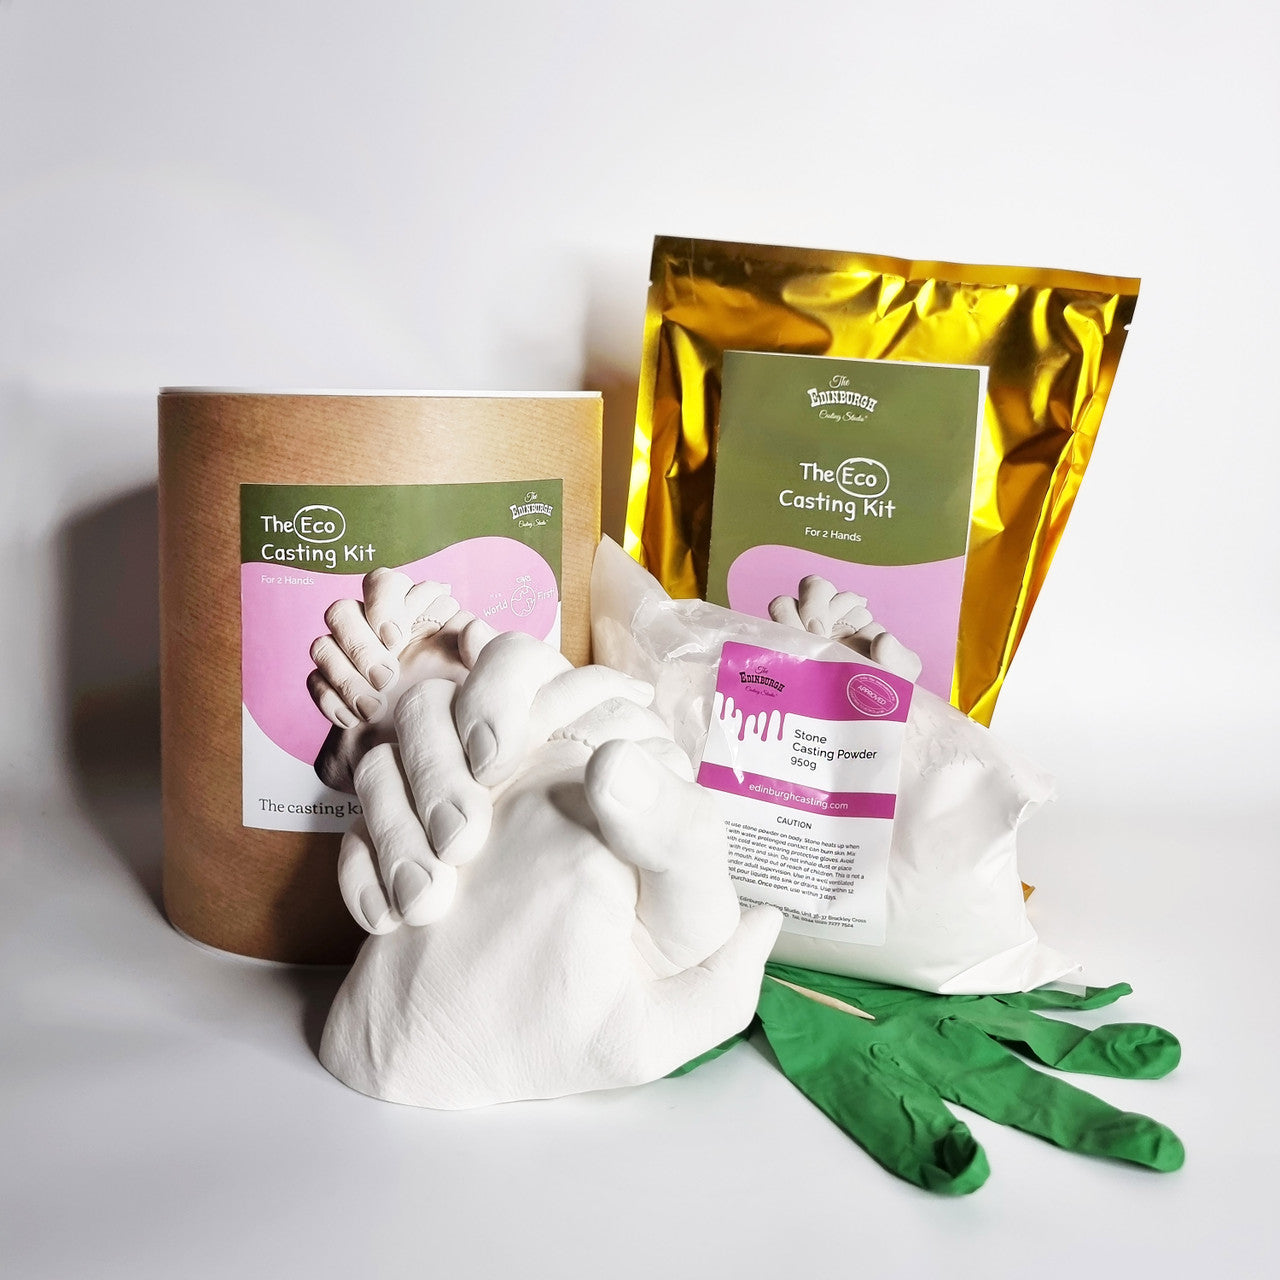 The World's first Eco-Friendly Hand Casting Kit